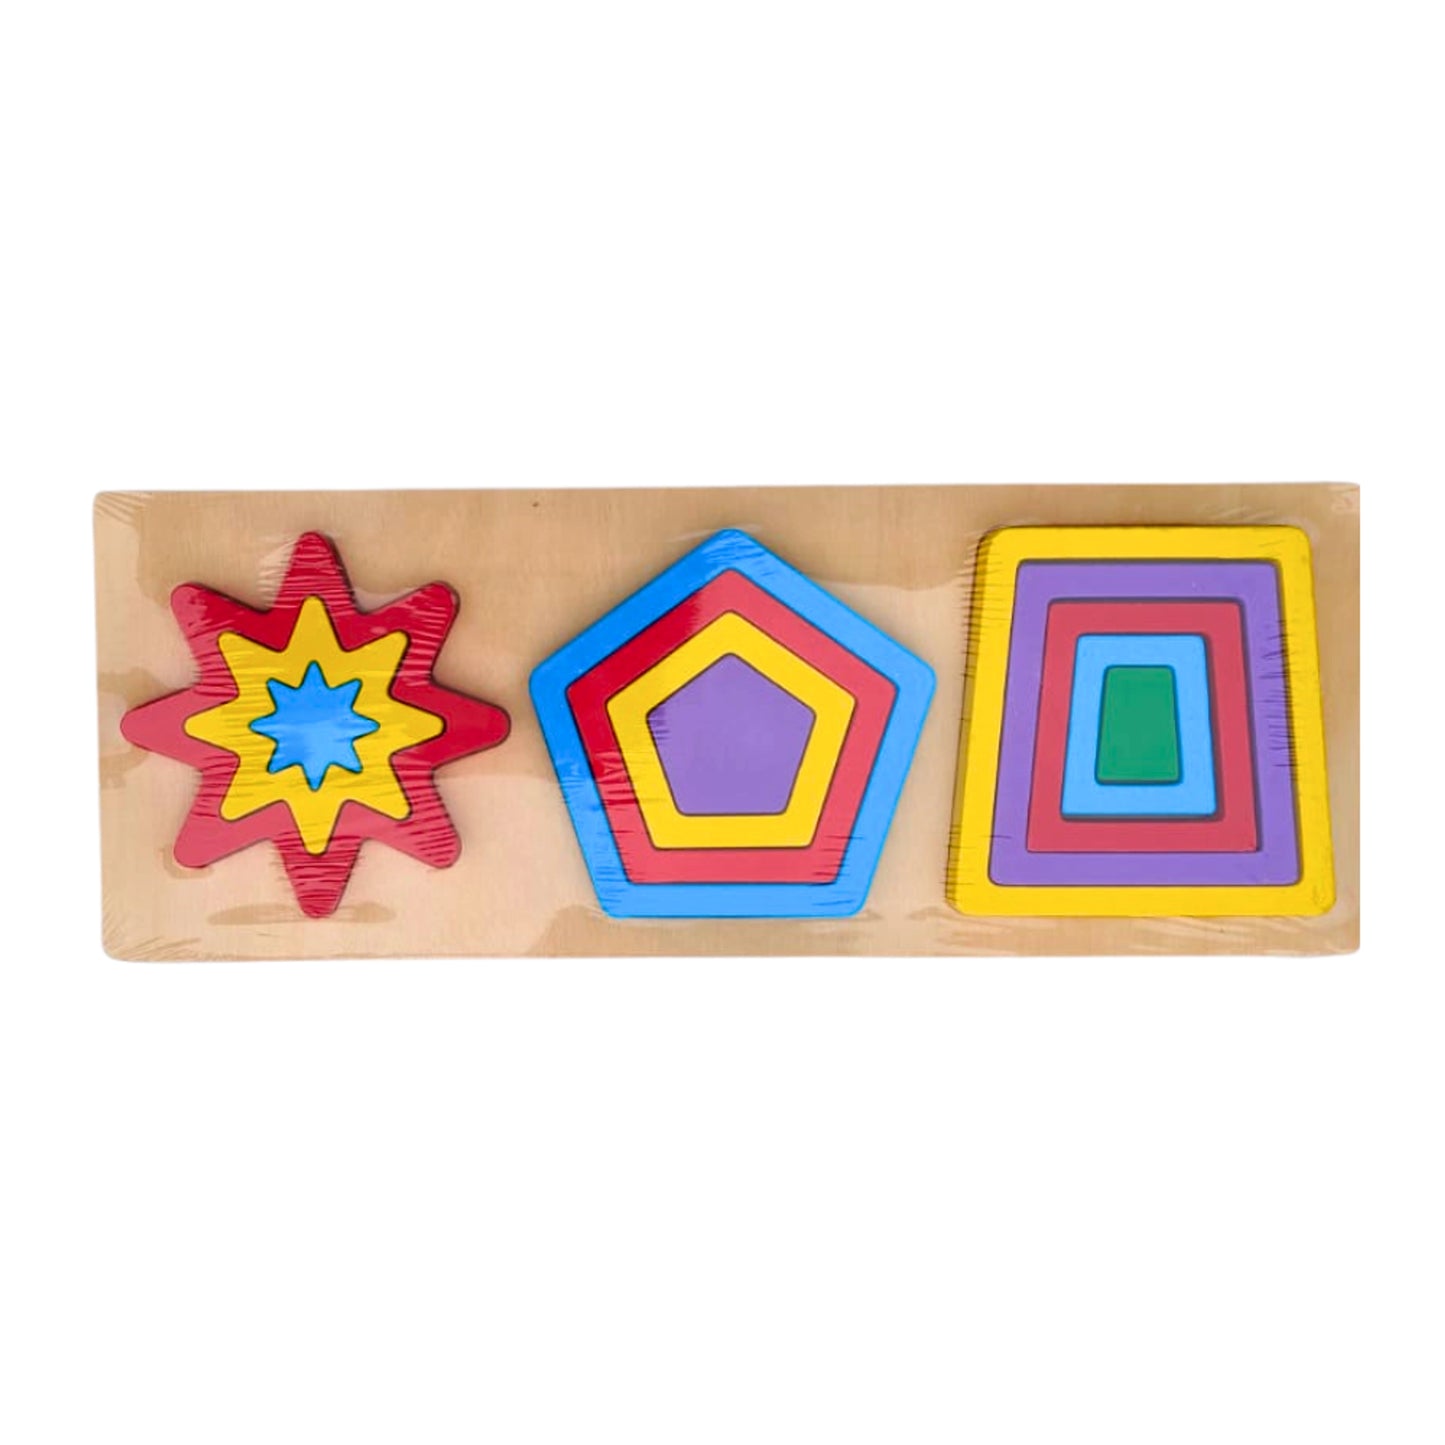 Wooden Rainbow Layered Puzzled Puzzle (Set of 2)